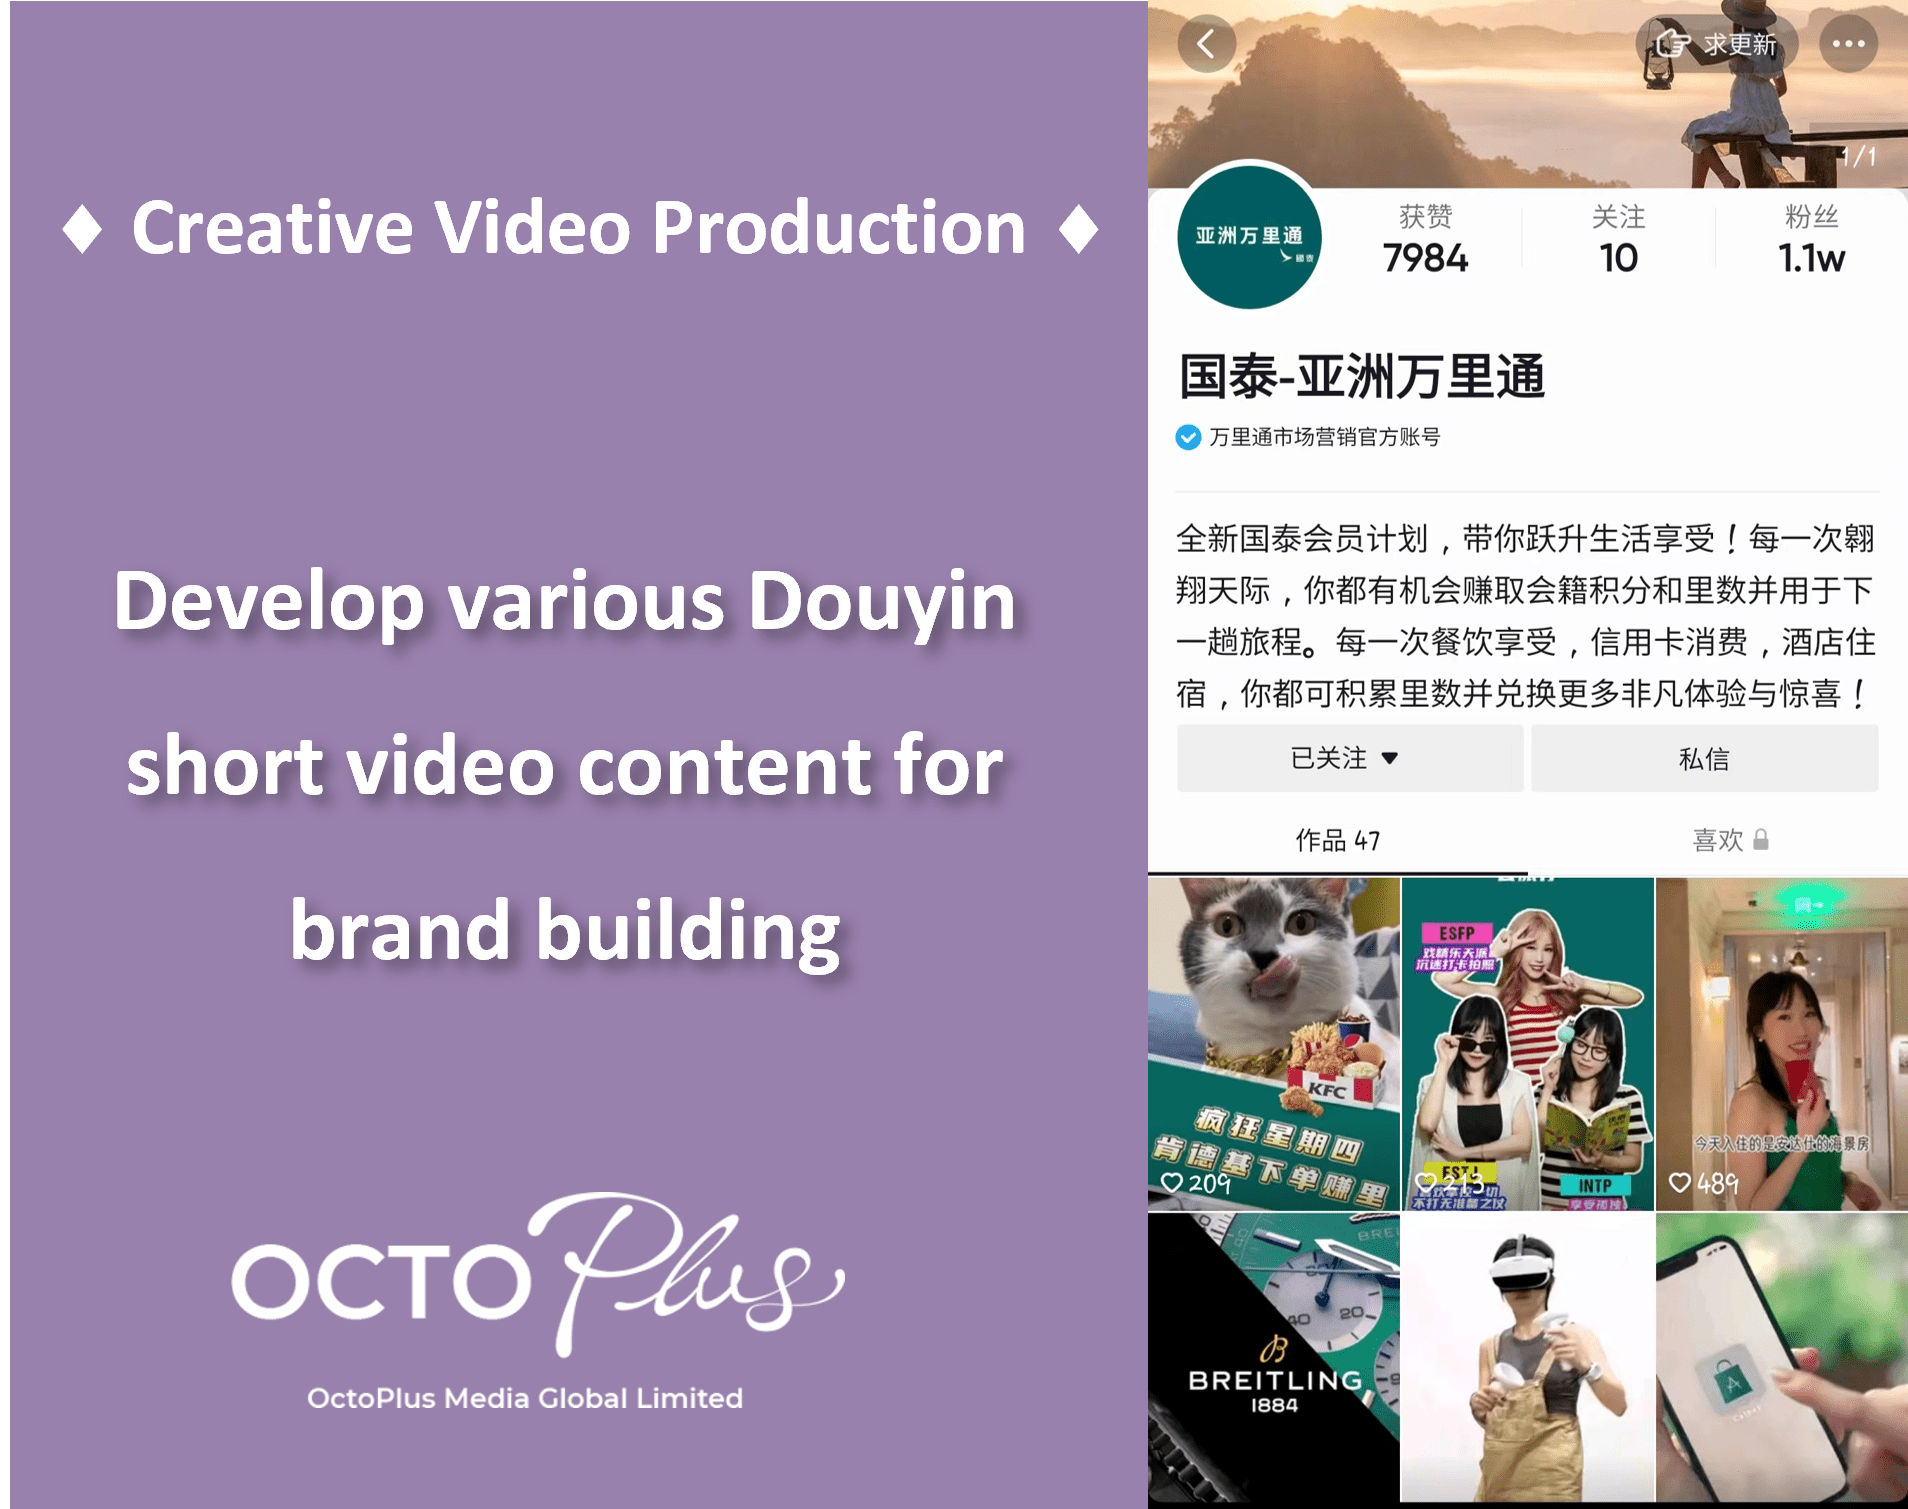 creative video production, china short video, douyin short video - Asia Miles